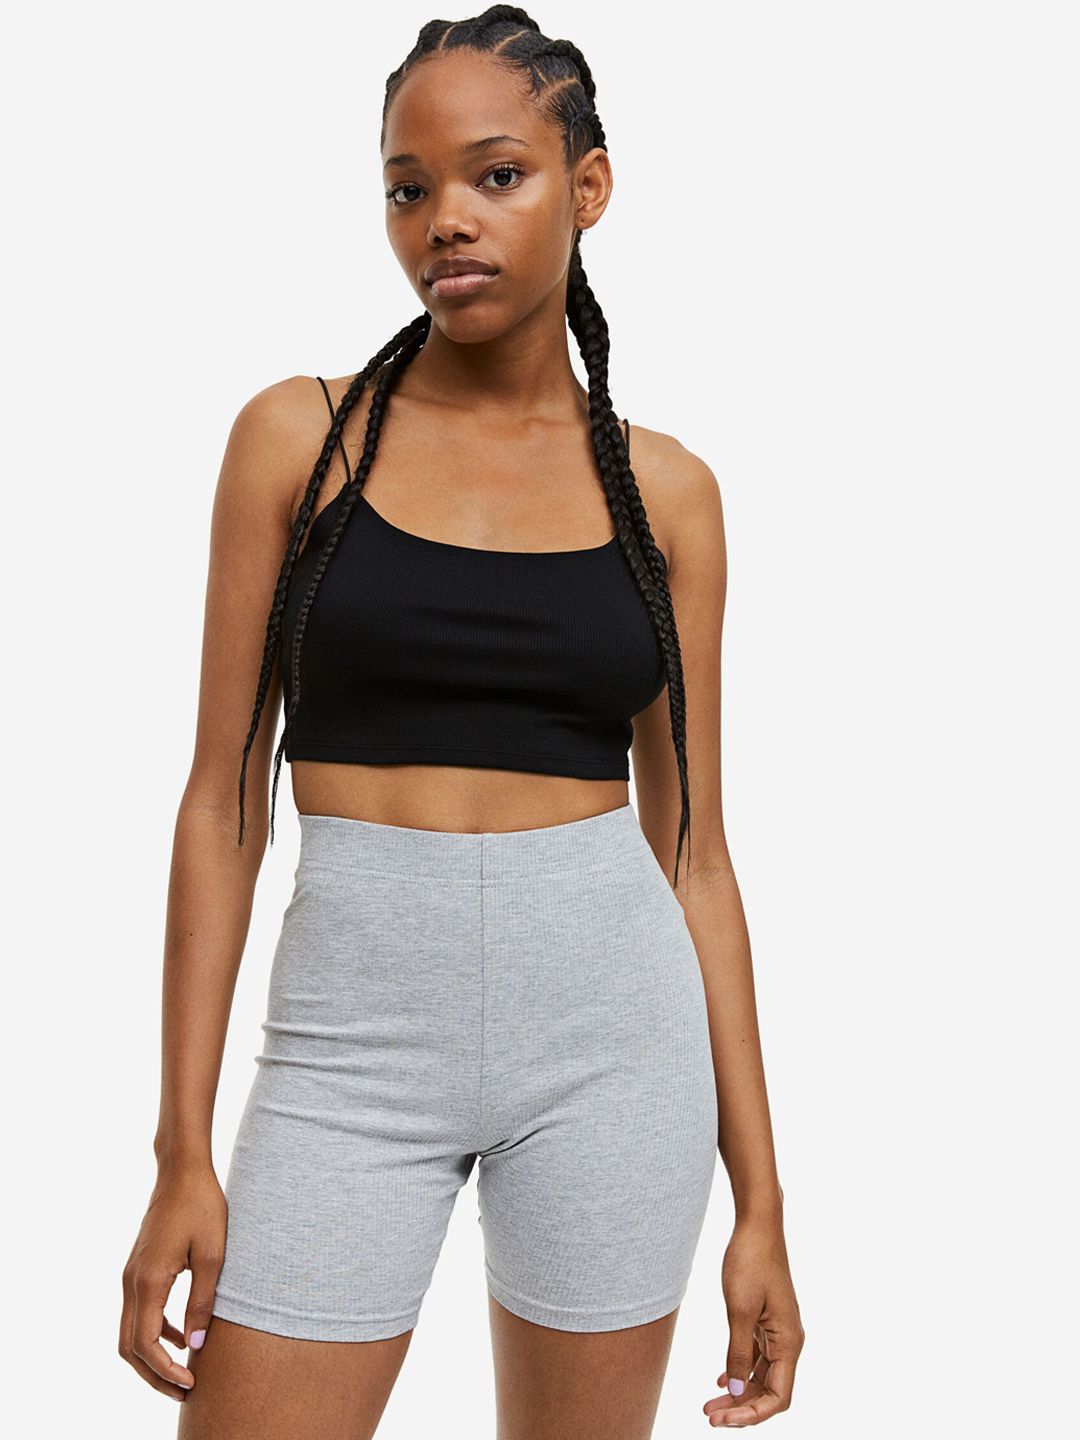 H&M Women 2-Pack Cycling Shorts Price in India